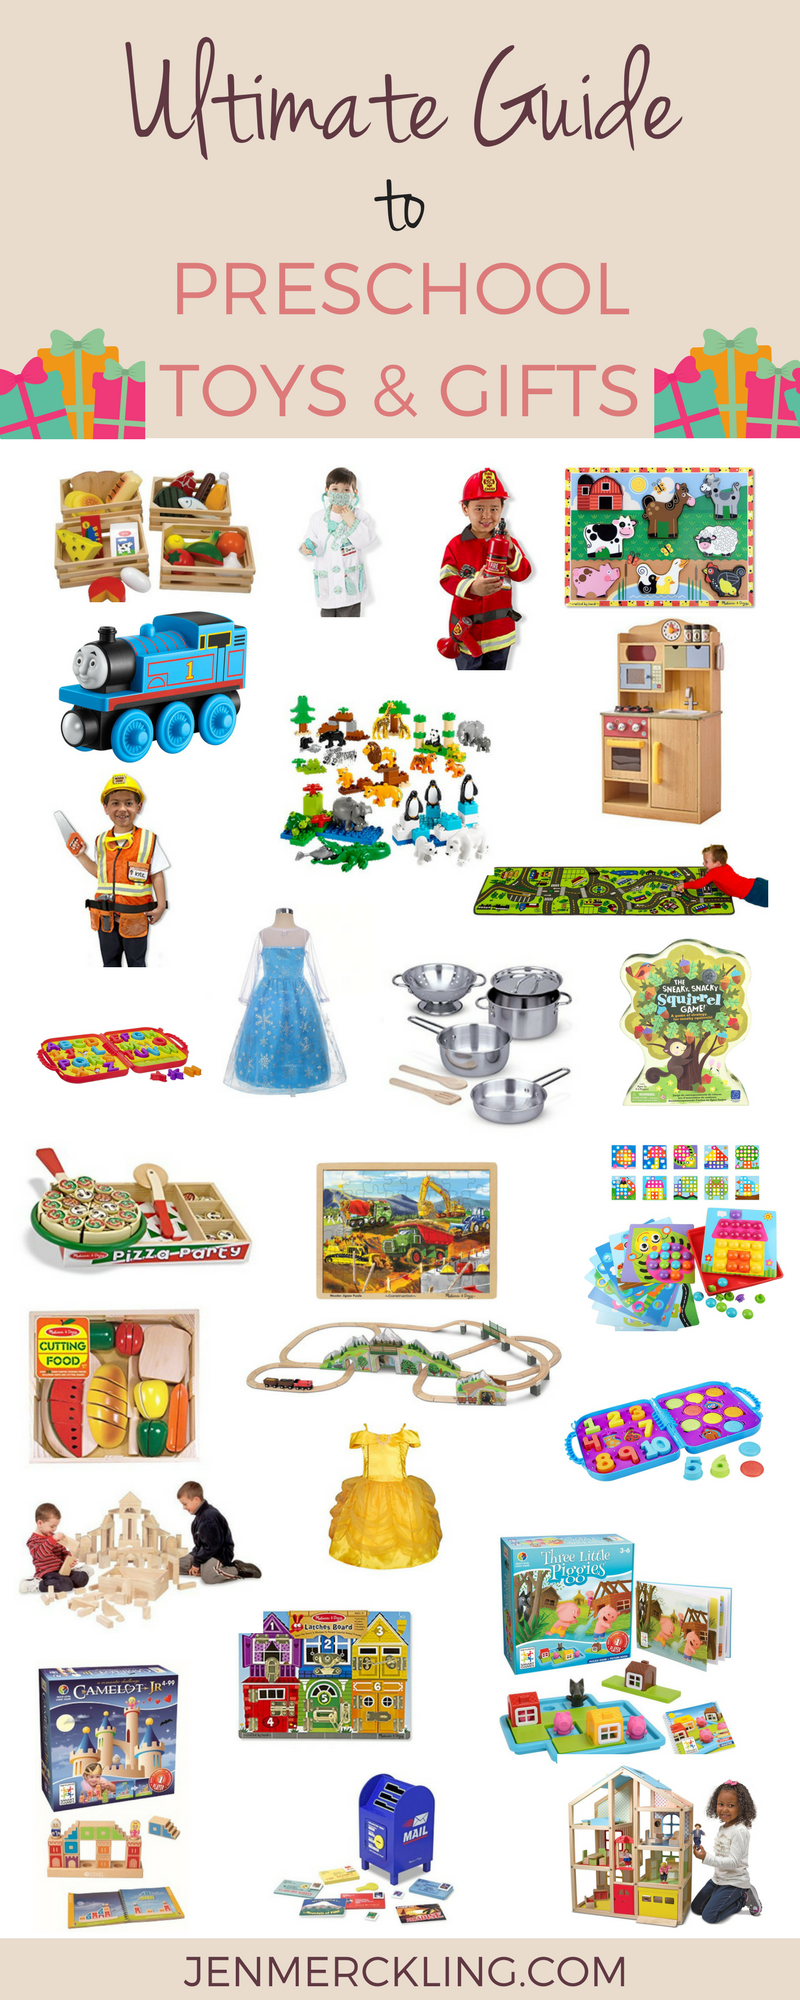 The ultimate guide to preschool toys. Find the perfect gifts to encourage imaginative play, motor skills, and cognitive development.